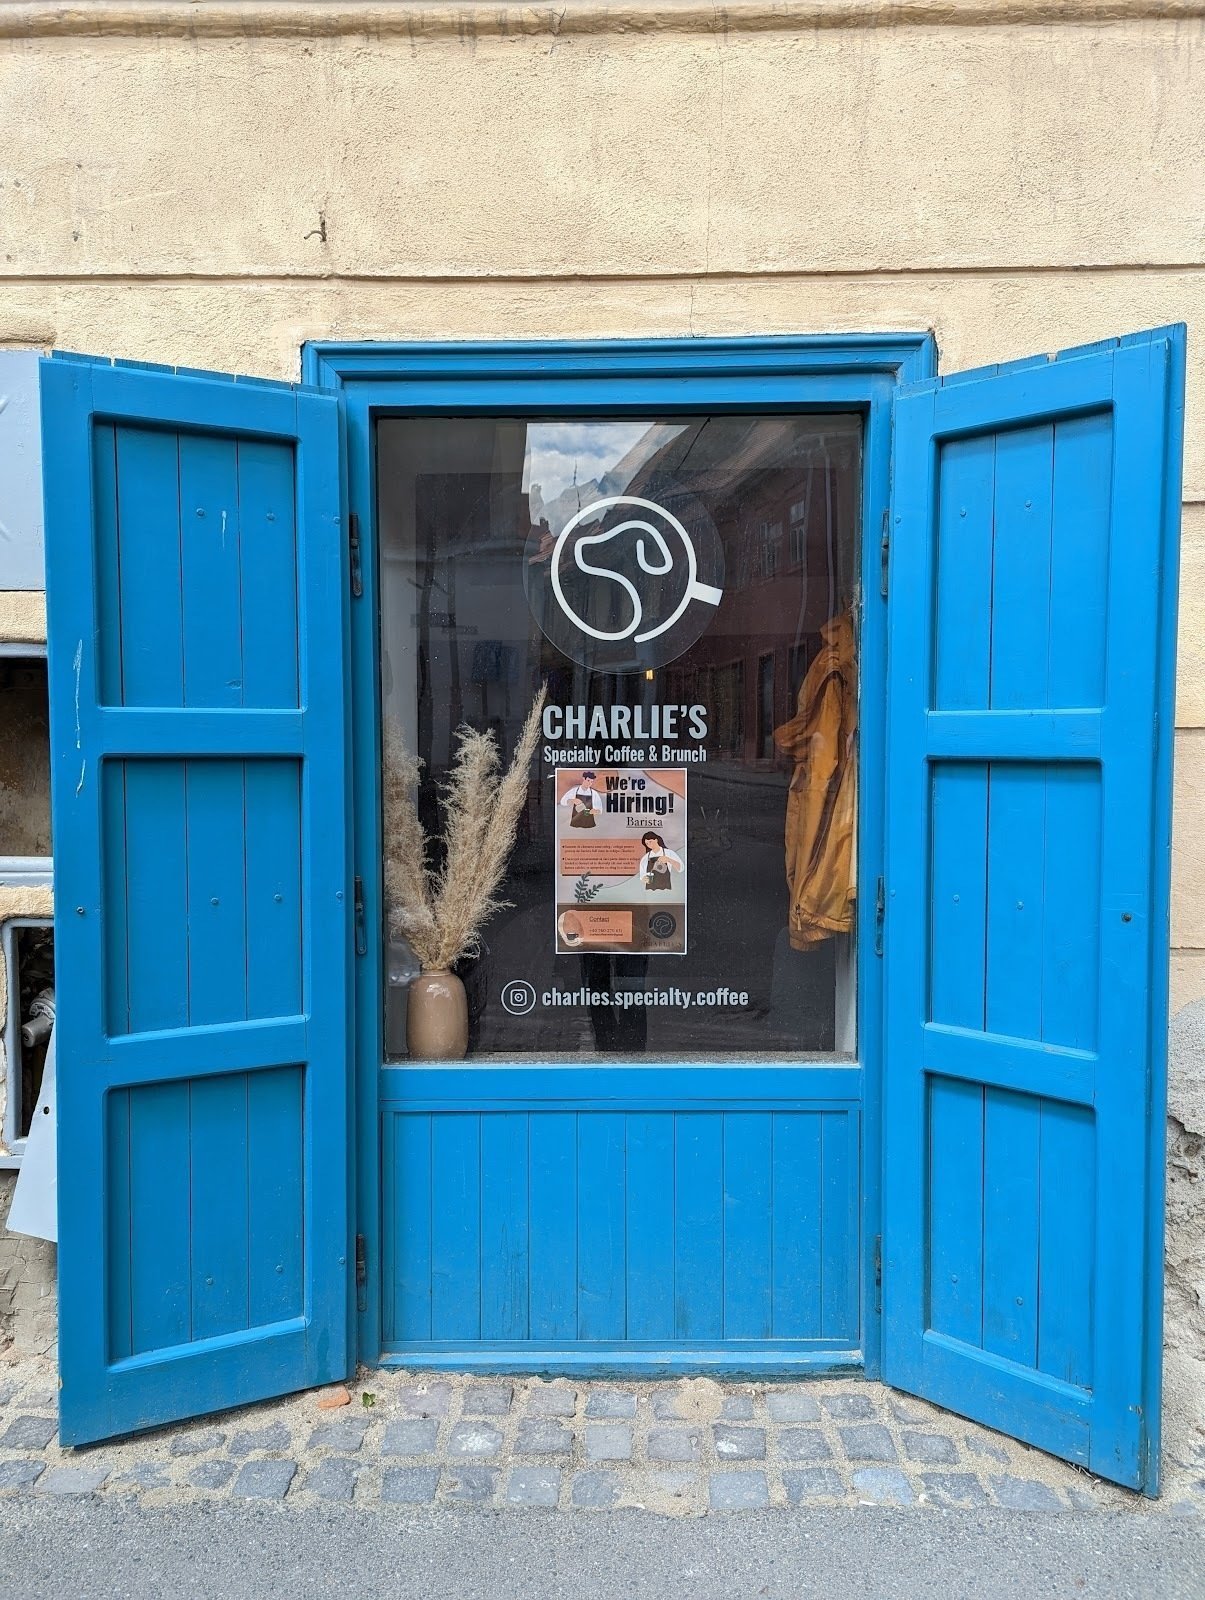 <span class="translation_missing" title="translation missing: en.meta.location_title, location_name: Charlie&#39;s Specialty Coffee And Wine, city: Sibiu">Location Title</span>